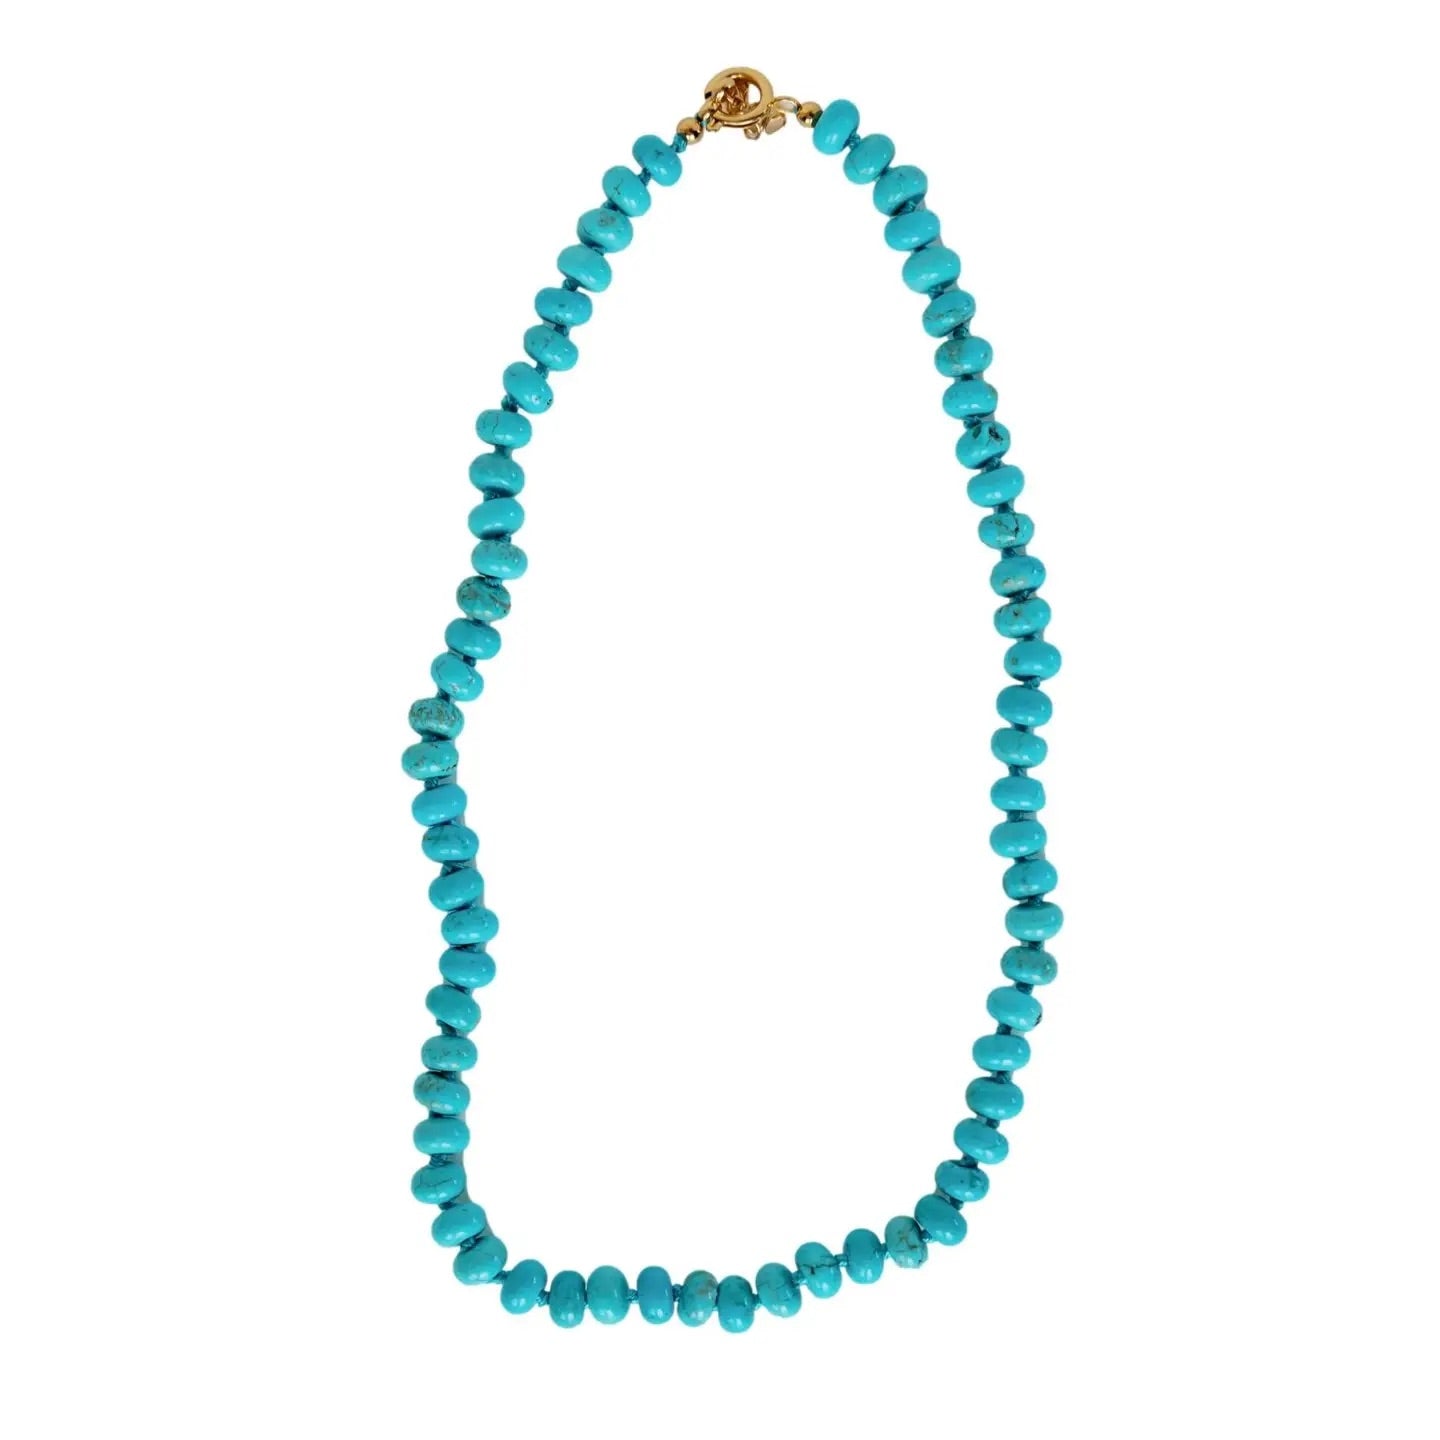 Genuine Turquoise Candy Necklace 18”